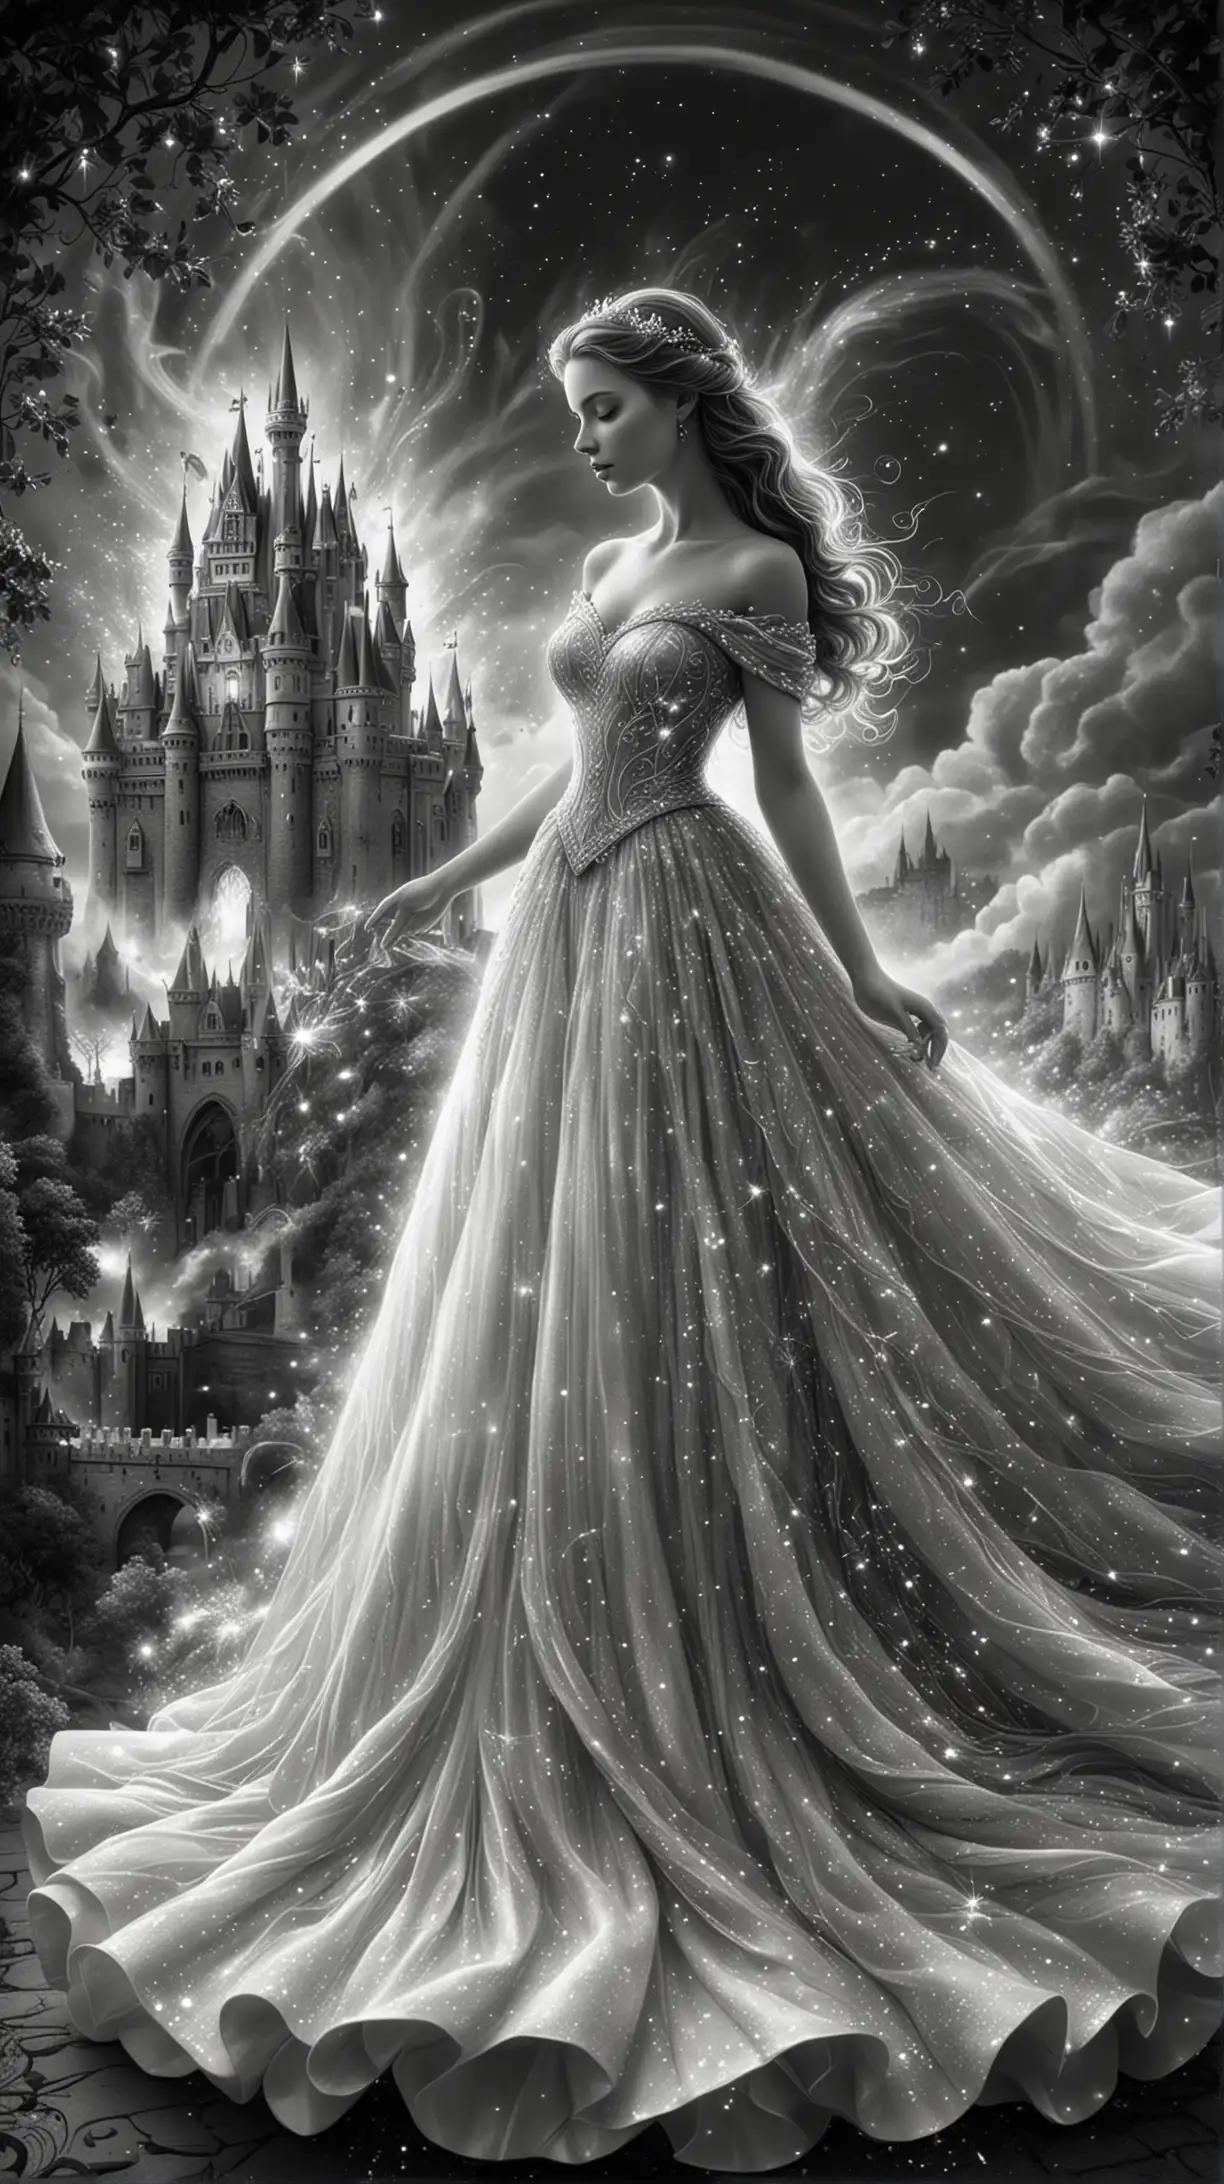 Ethereal Princess in Iridescent Gown with FairyTale Castle Background